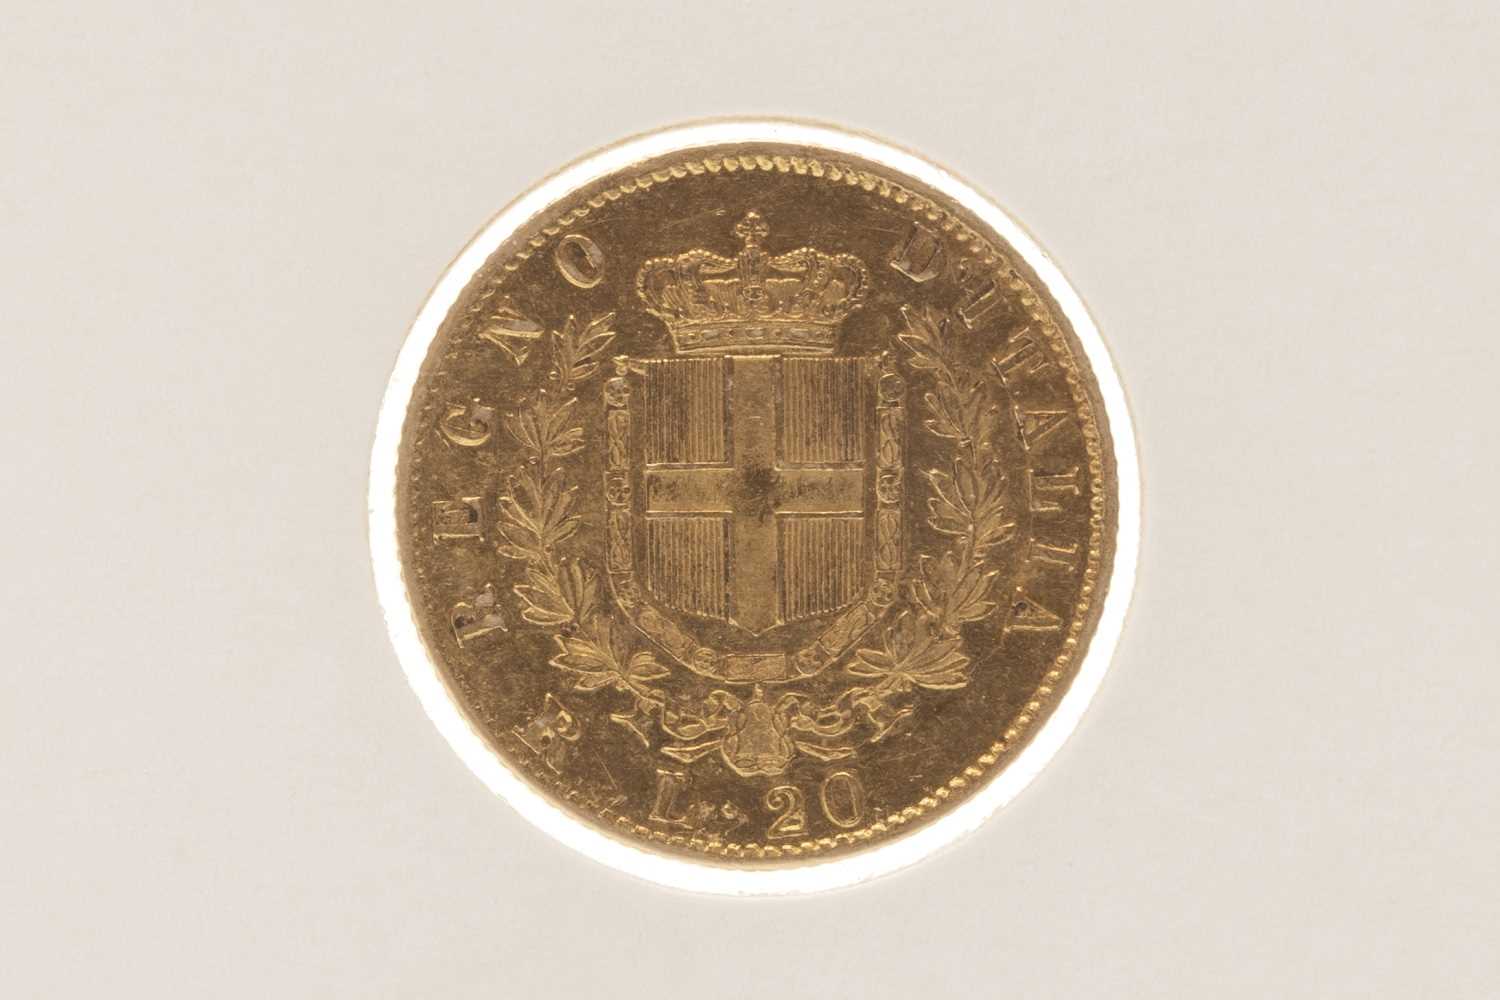 Lot 571 - A GOLD 20 LIRE COIN, 1878